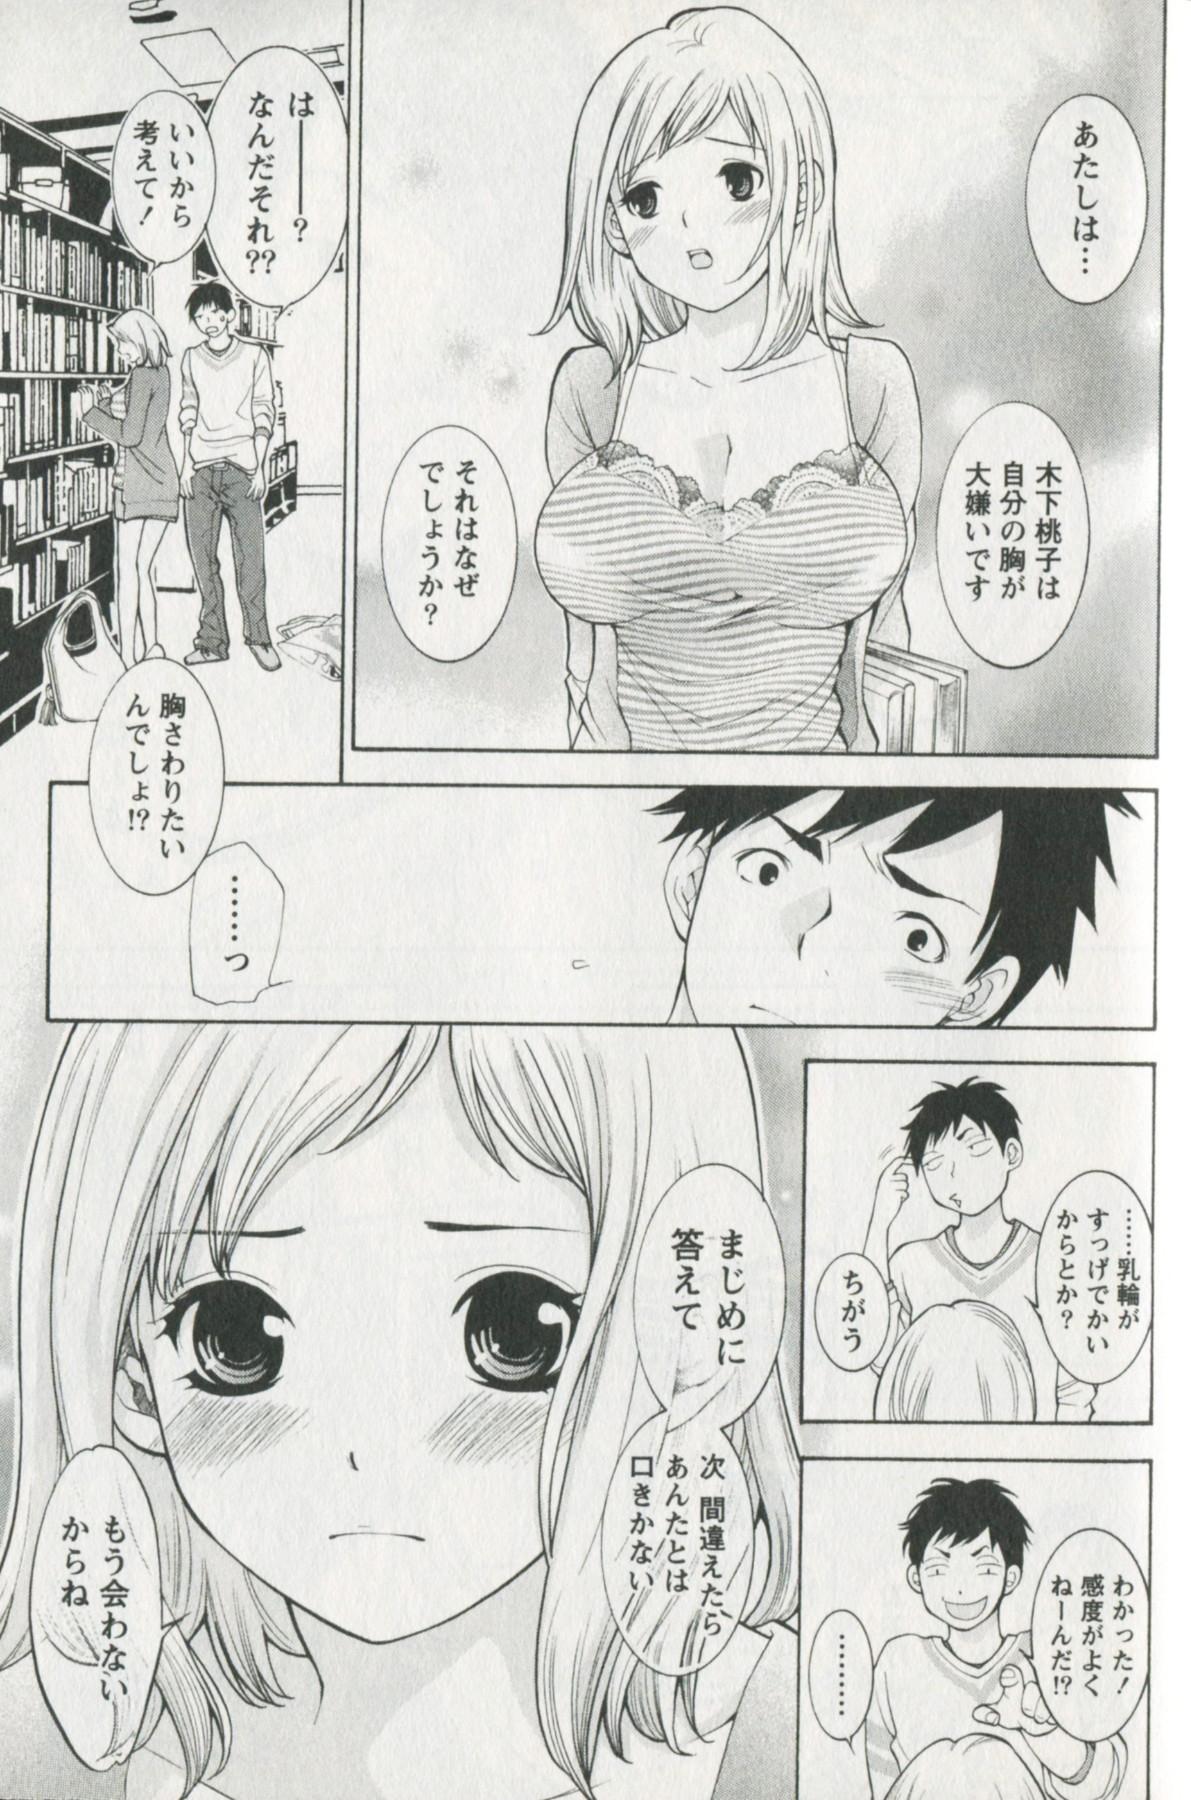 Jisho to Skirt - She Put Down the Dictionary, then Took off her Skirt. 140